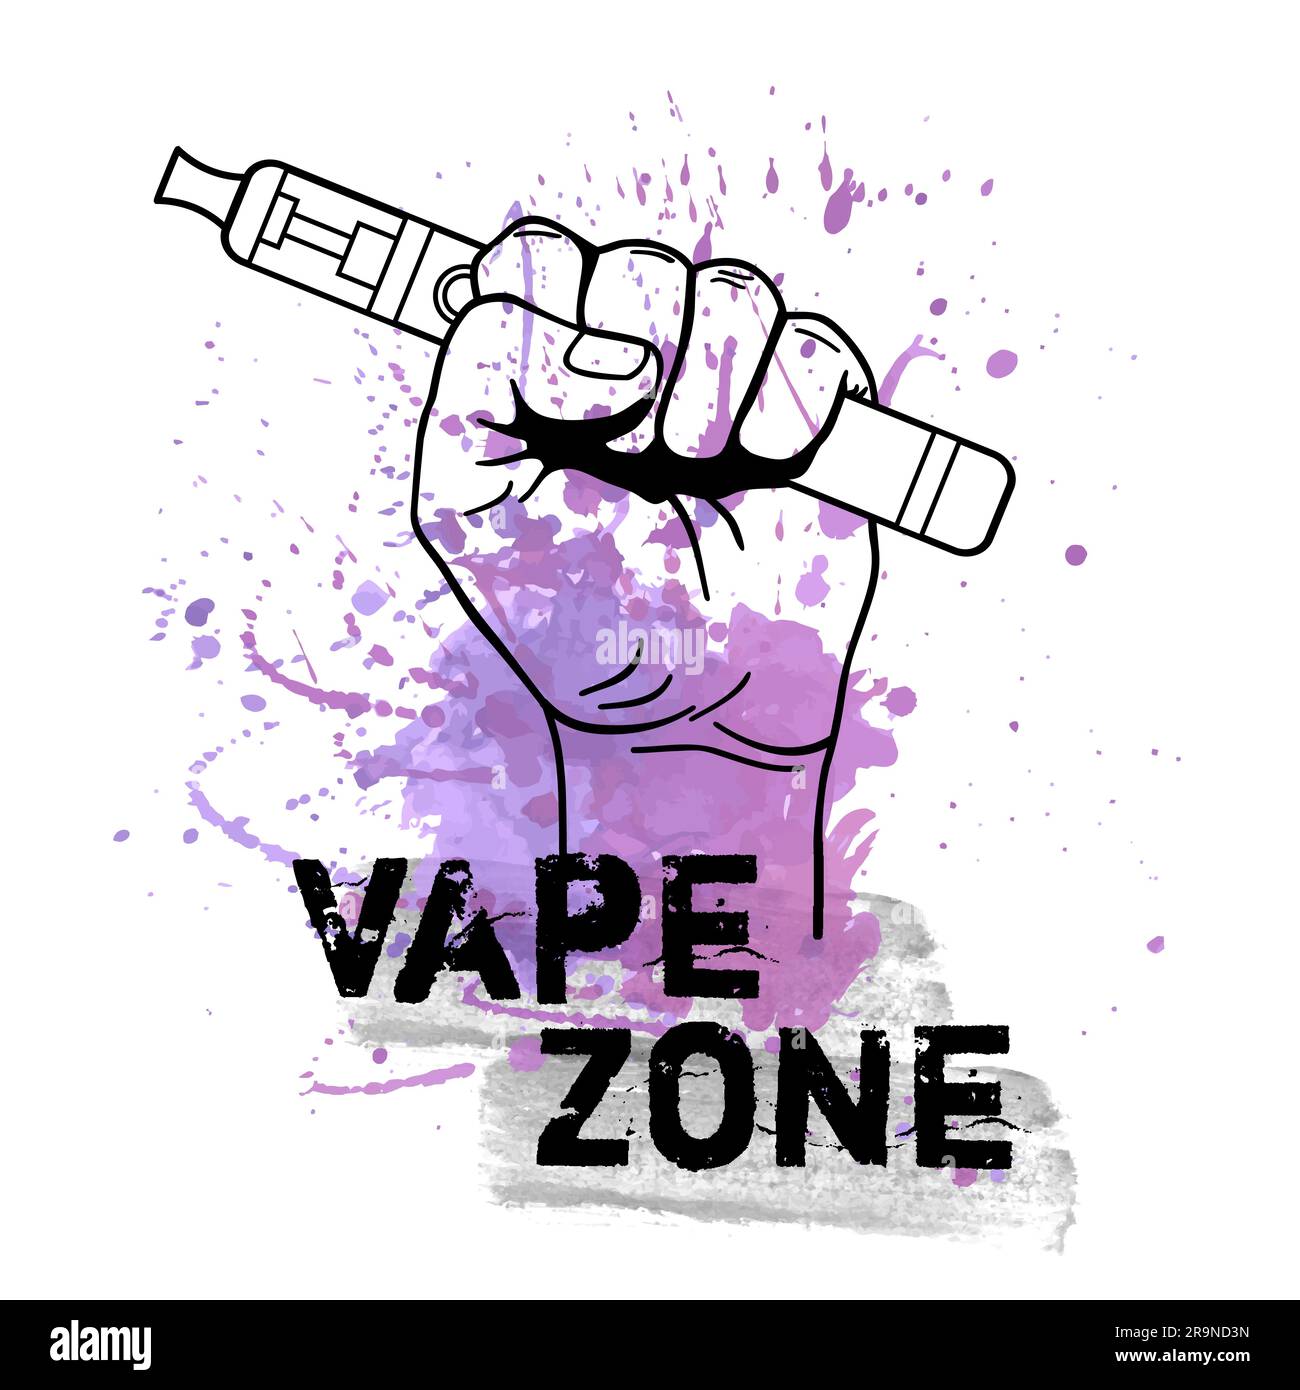 Vector vape zone illustration with watercolor splash and hand holding electric tool for vaping. Vapor, electric cigarette, vaporizer e-cig icon. Stock Vector